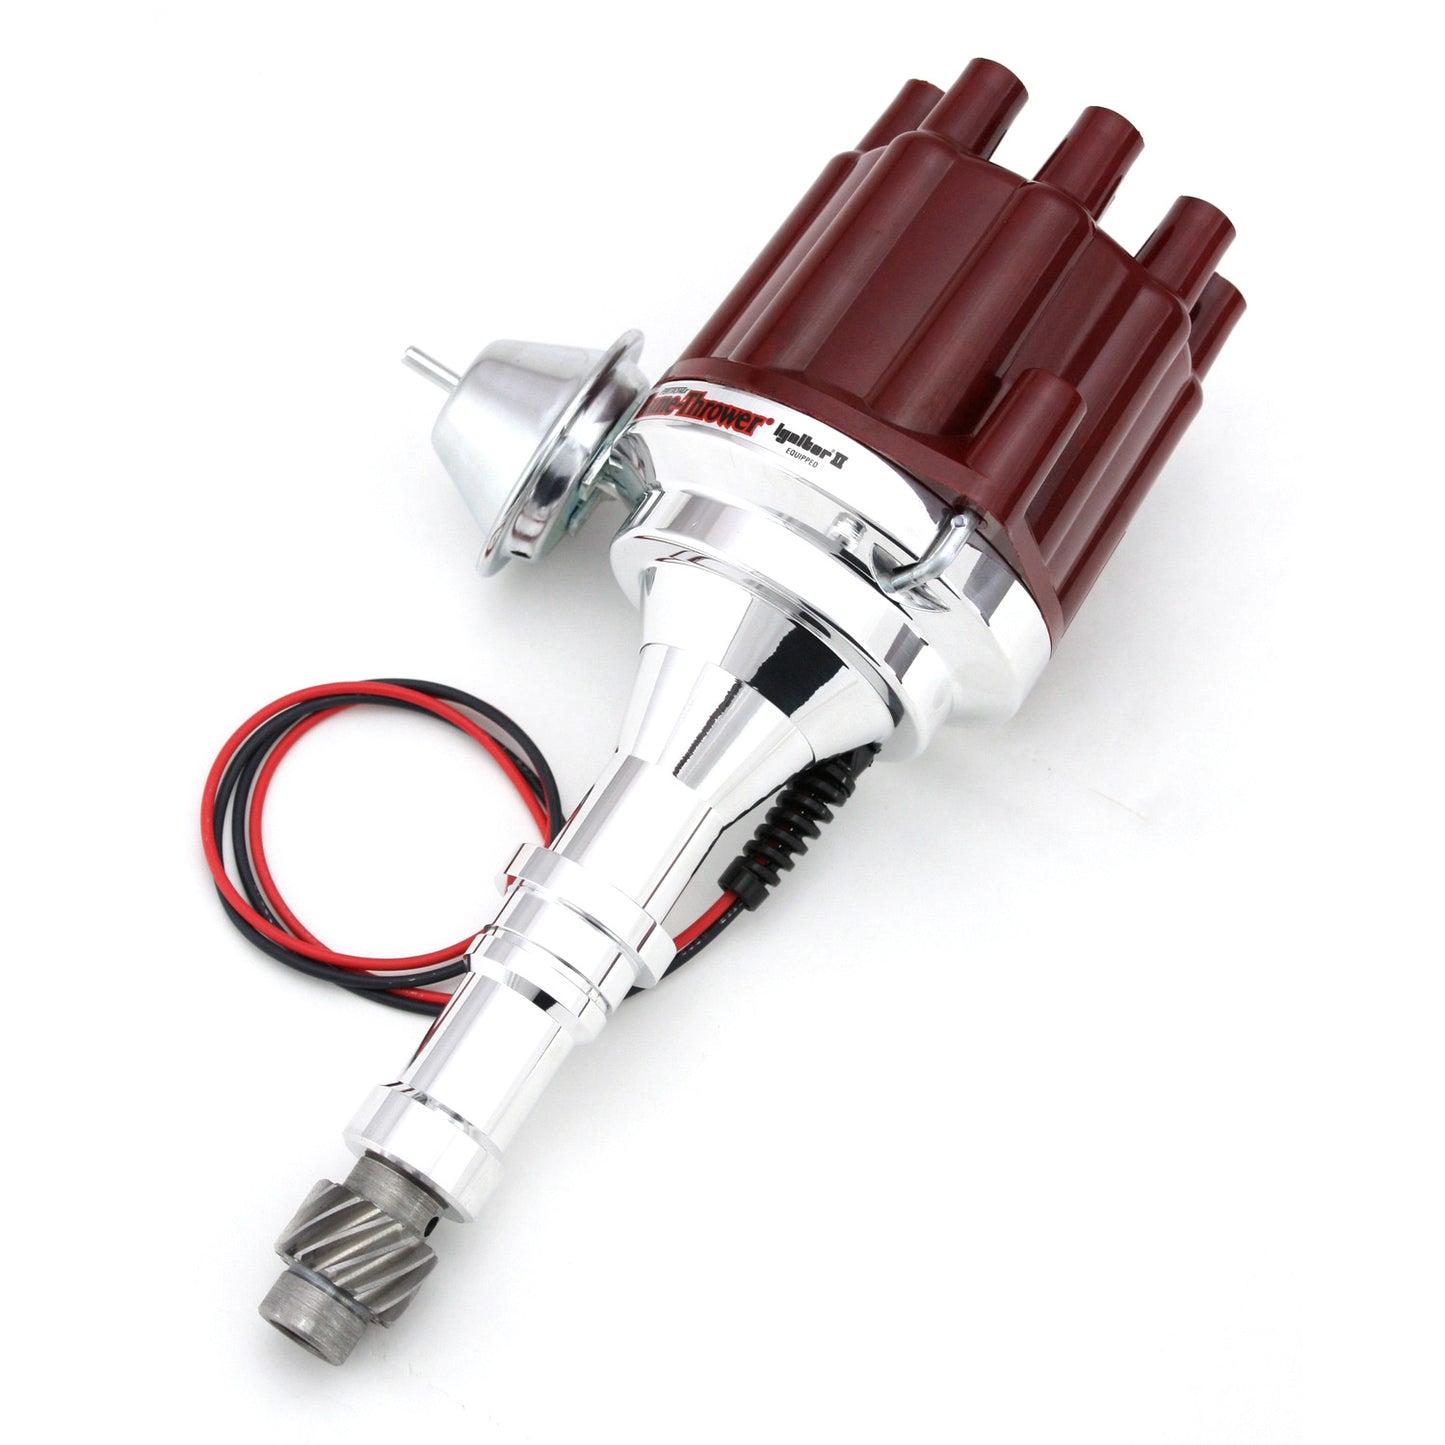 PerTronix D7151701 Flame-Thrower Electronic Distributor Billet Buick V8 215-350 Plug and Play with Ignitor III Technology Vacuum Advance Red Cap